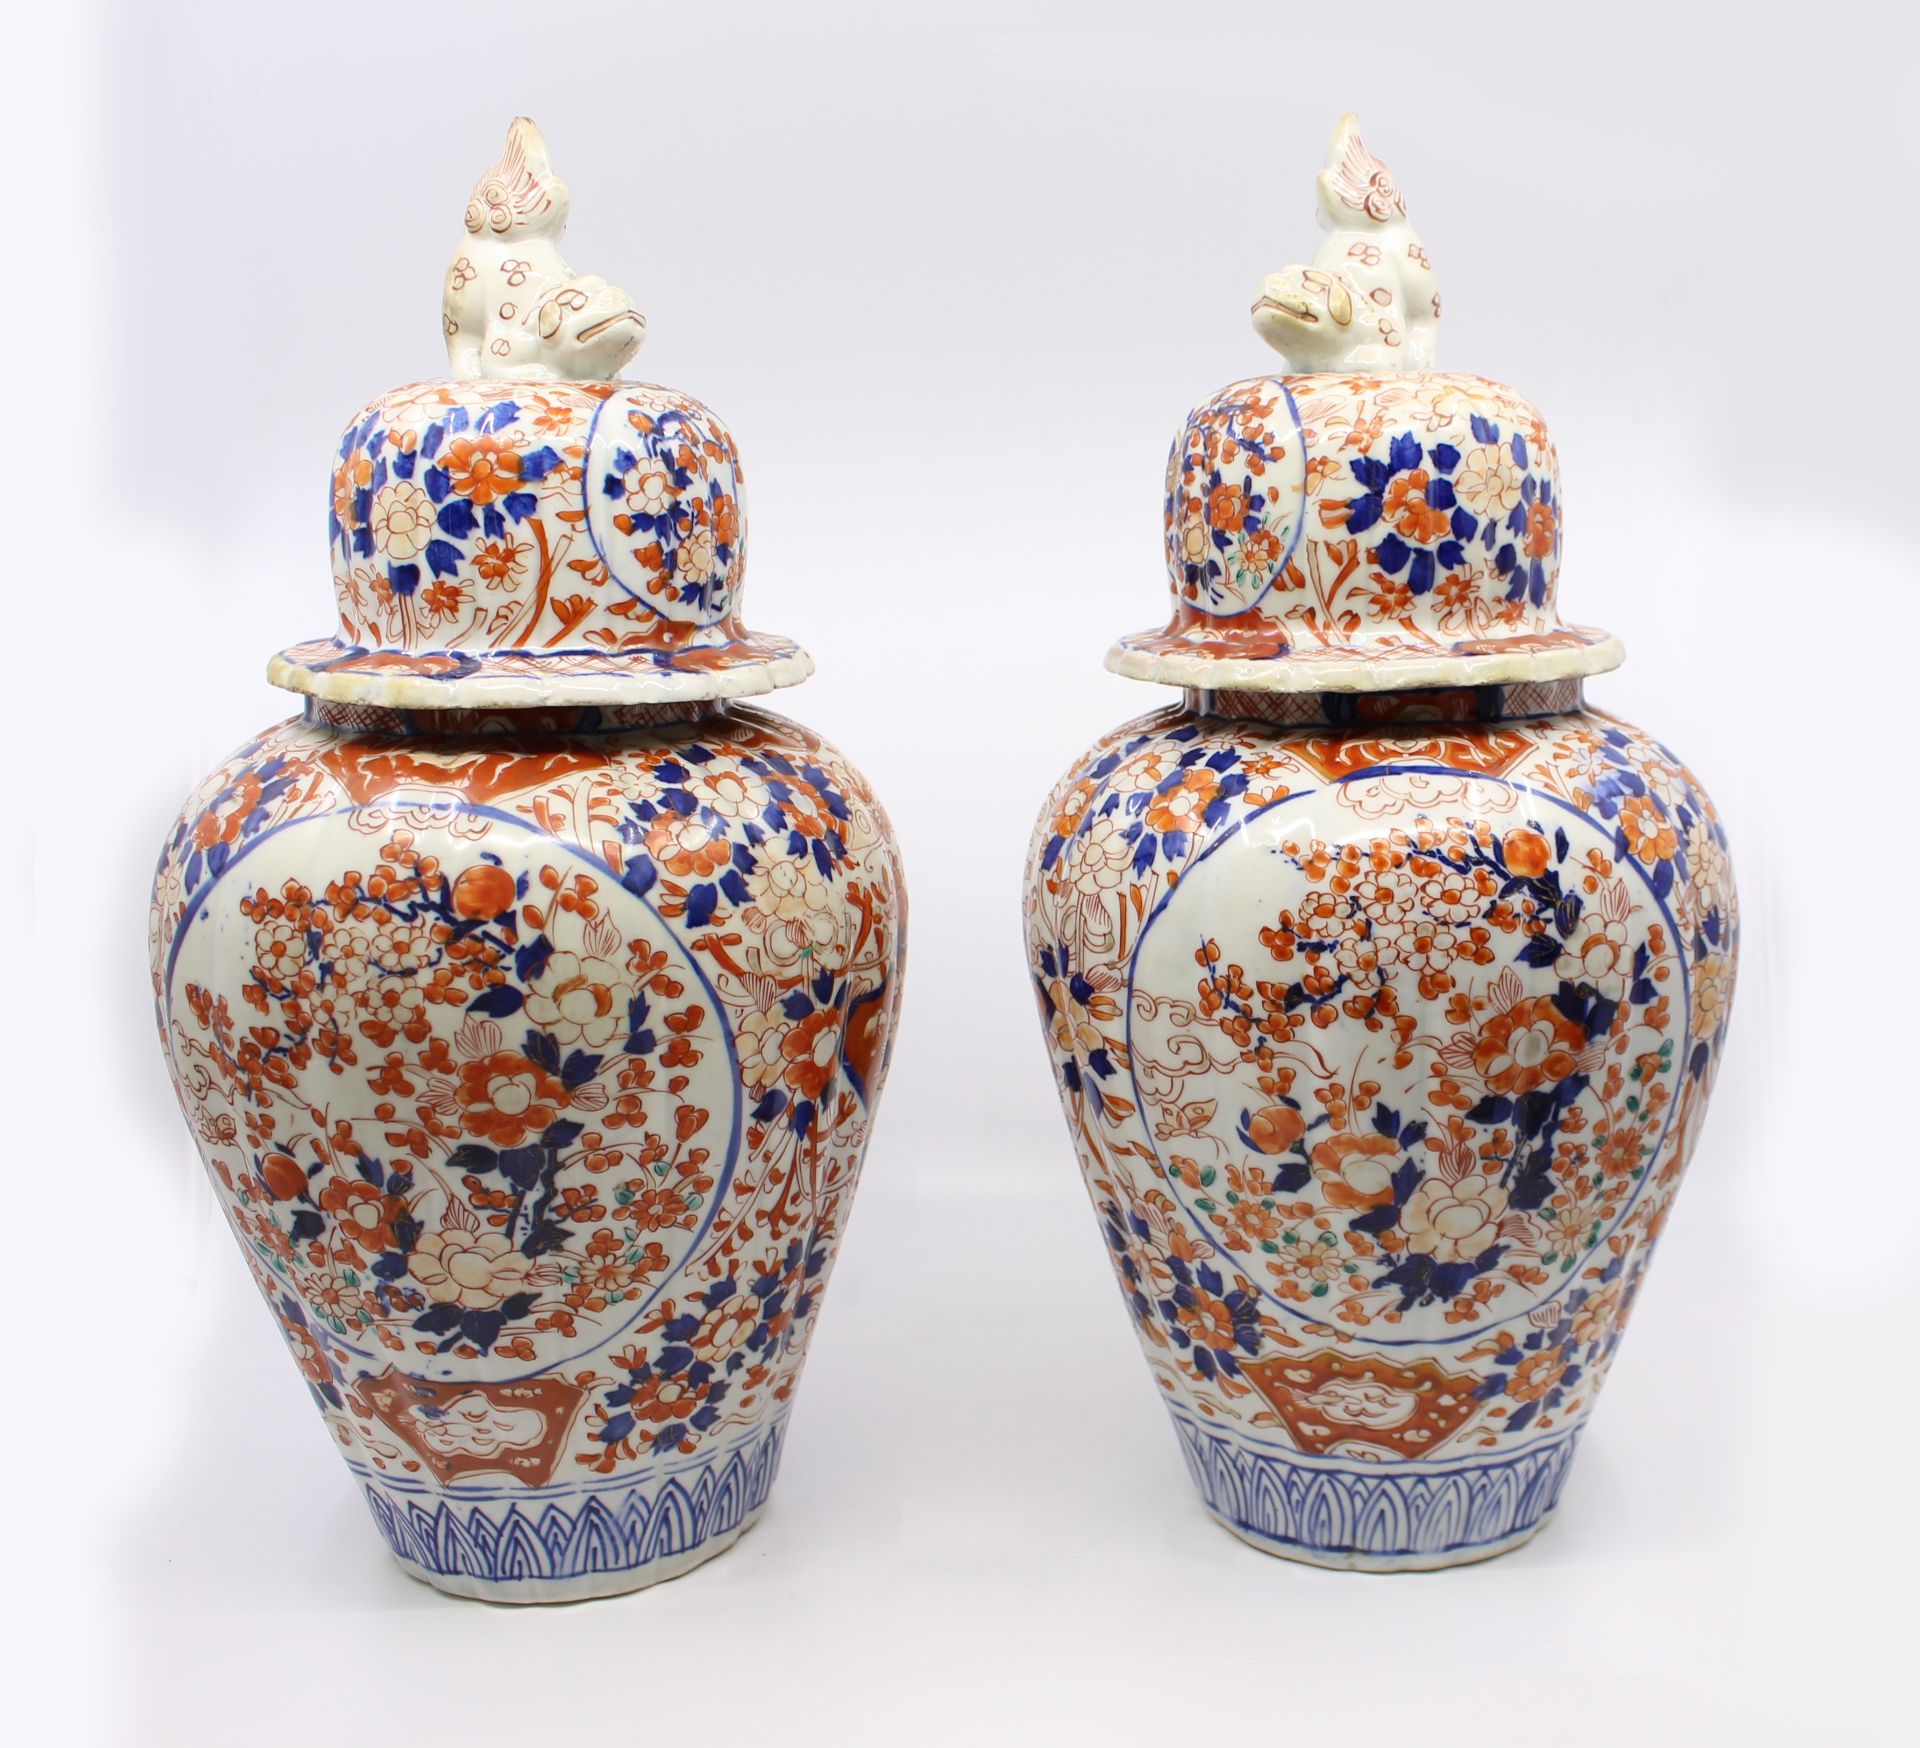 Pair of Antique Chinese Lidded Urns